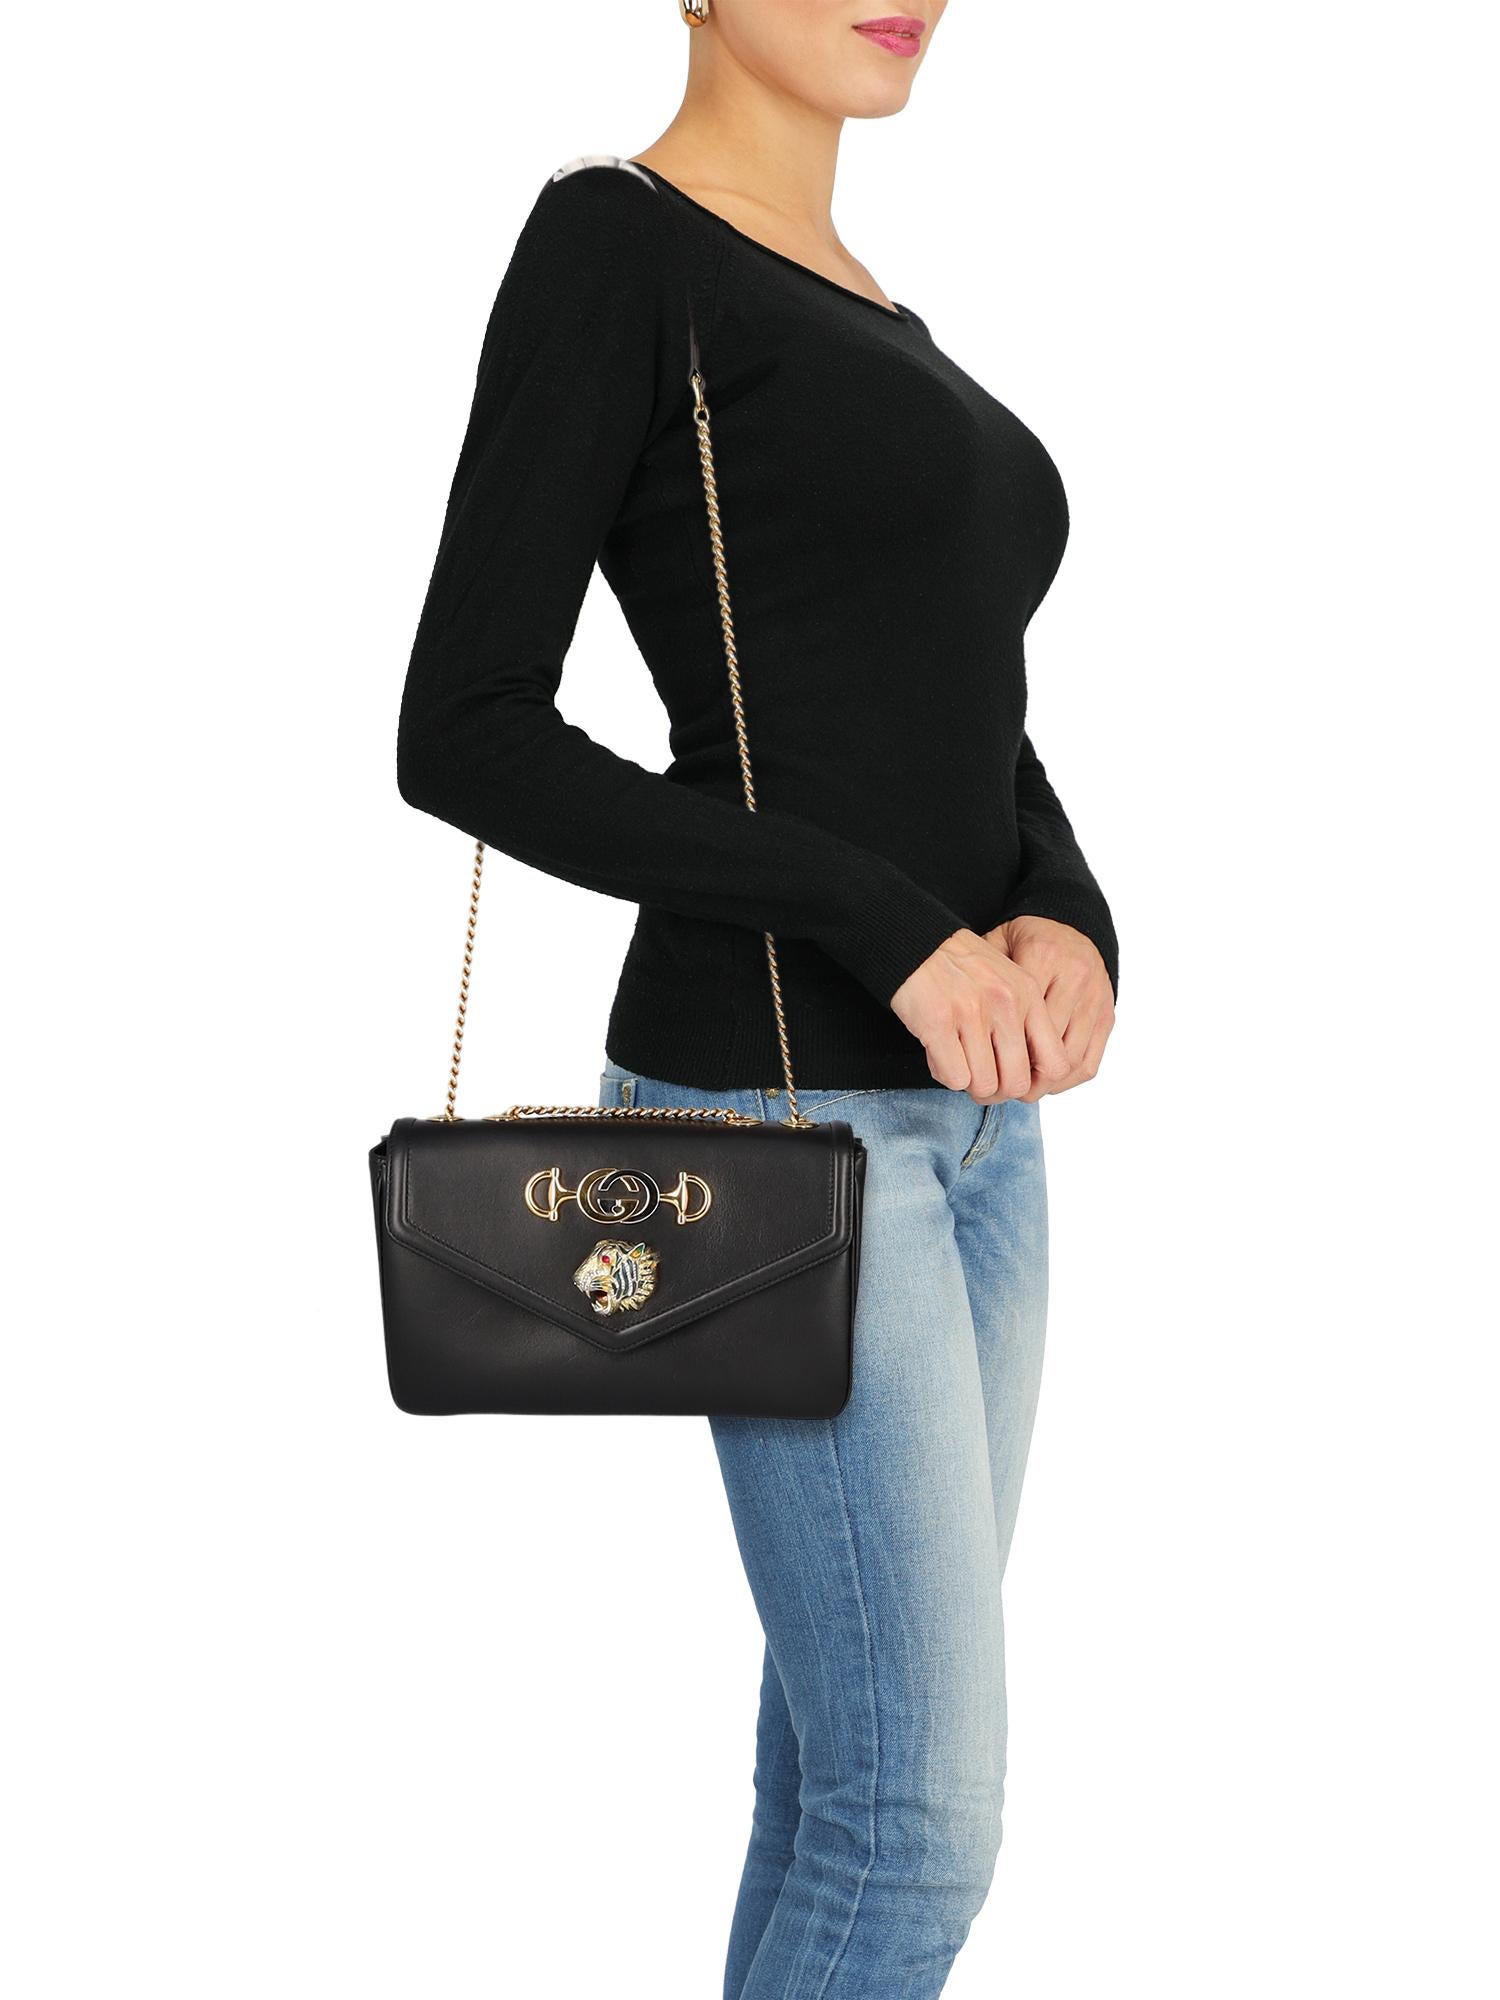 Product Description: Bag, leather, solid color, iconic detail, magnetic closure, gold-tone hardware, internal zipped pocket, internal pocket, day bag

Includes:
Box
 Dust bag

Product Condition: Very Good
Lining: slightly visible stain. External